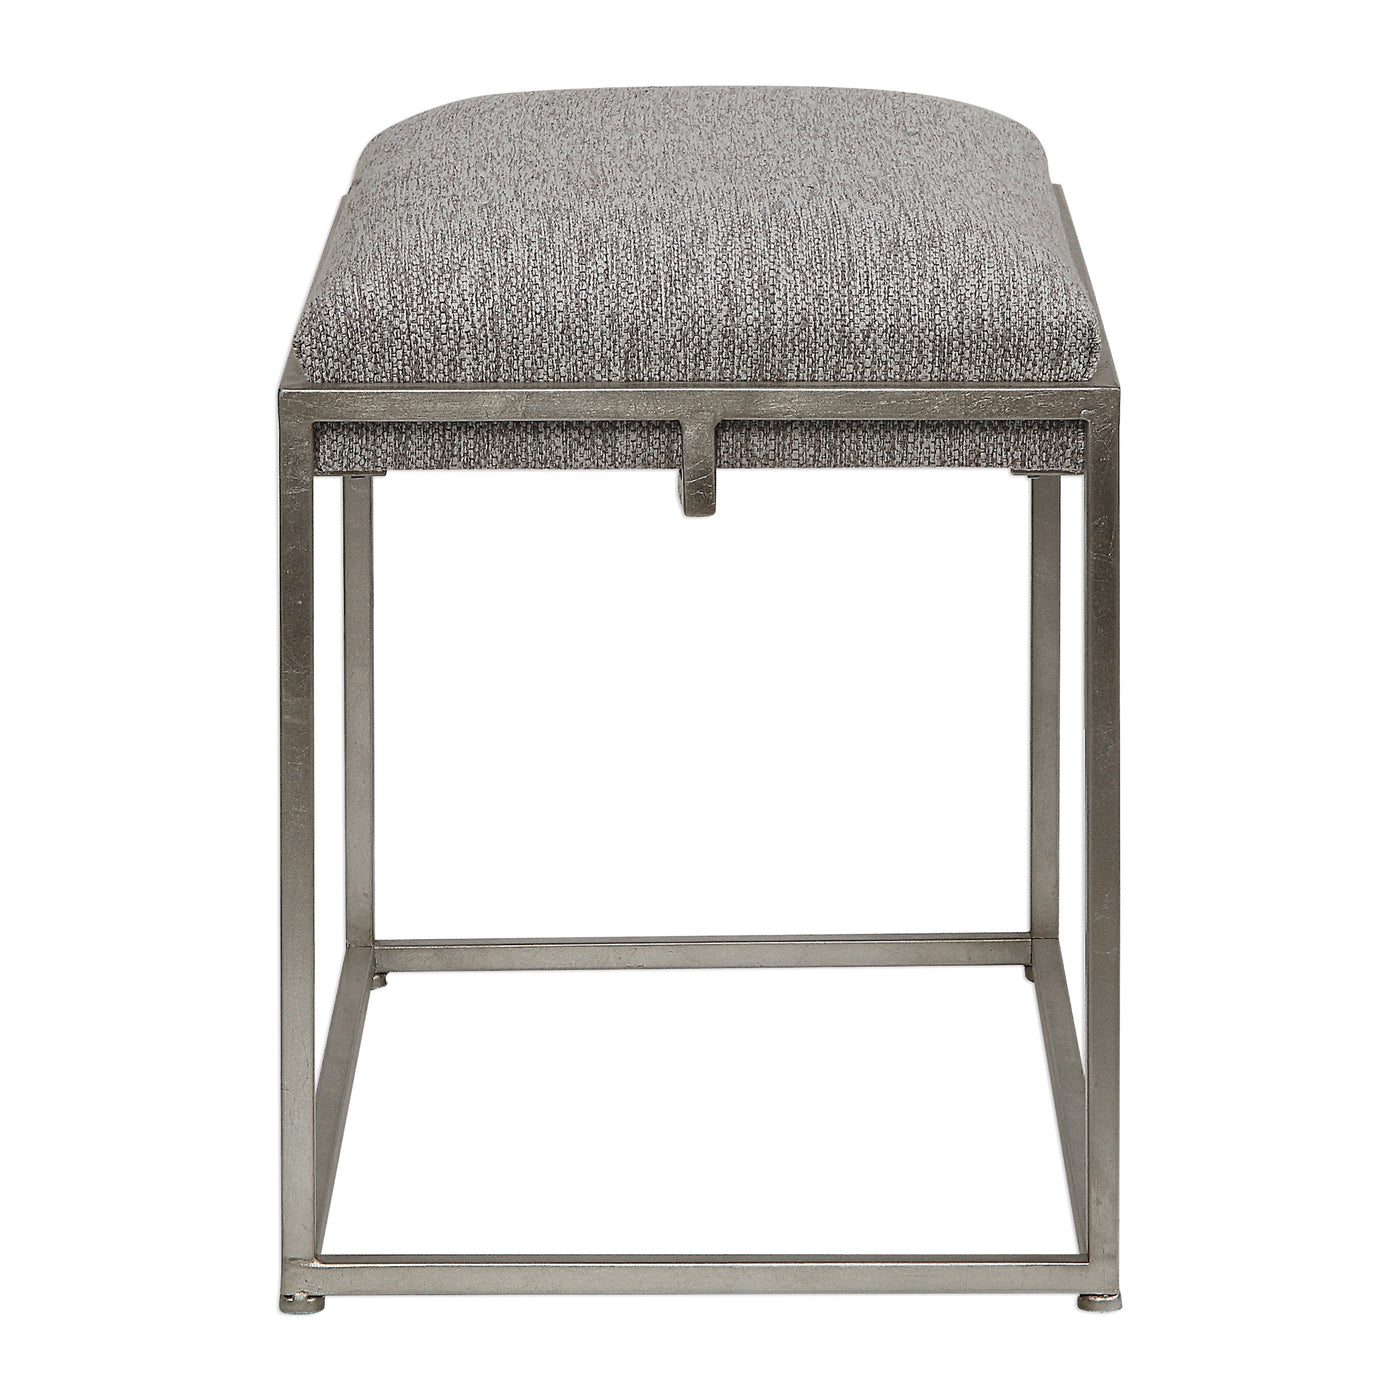 Welded Iron Frame Finished In A Lightly Antiqued Metallic Silver Leaf, Cradling A Hand Upholstered Plush Seat In A Woven A...